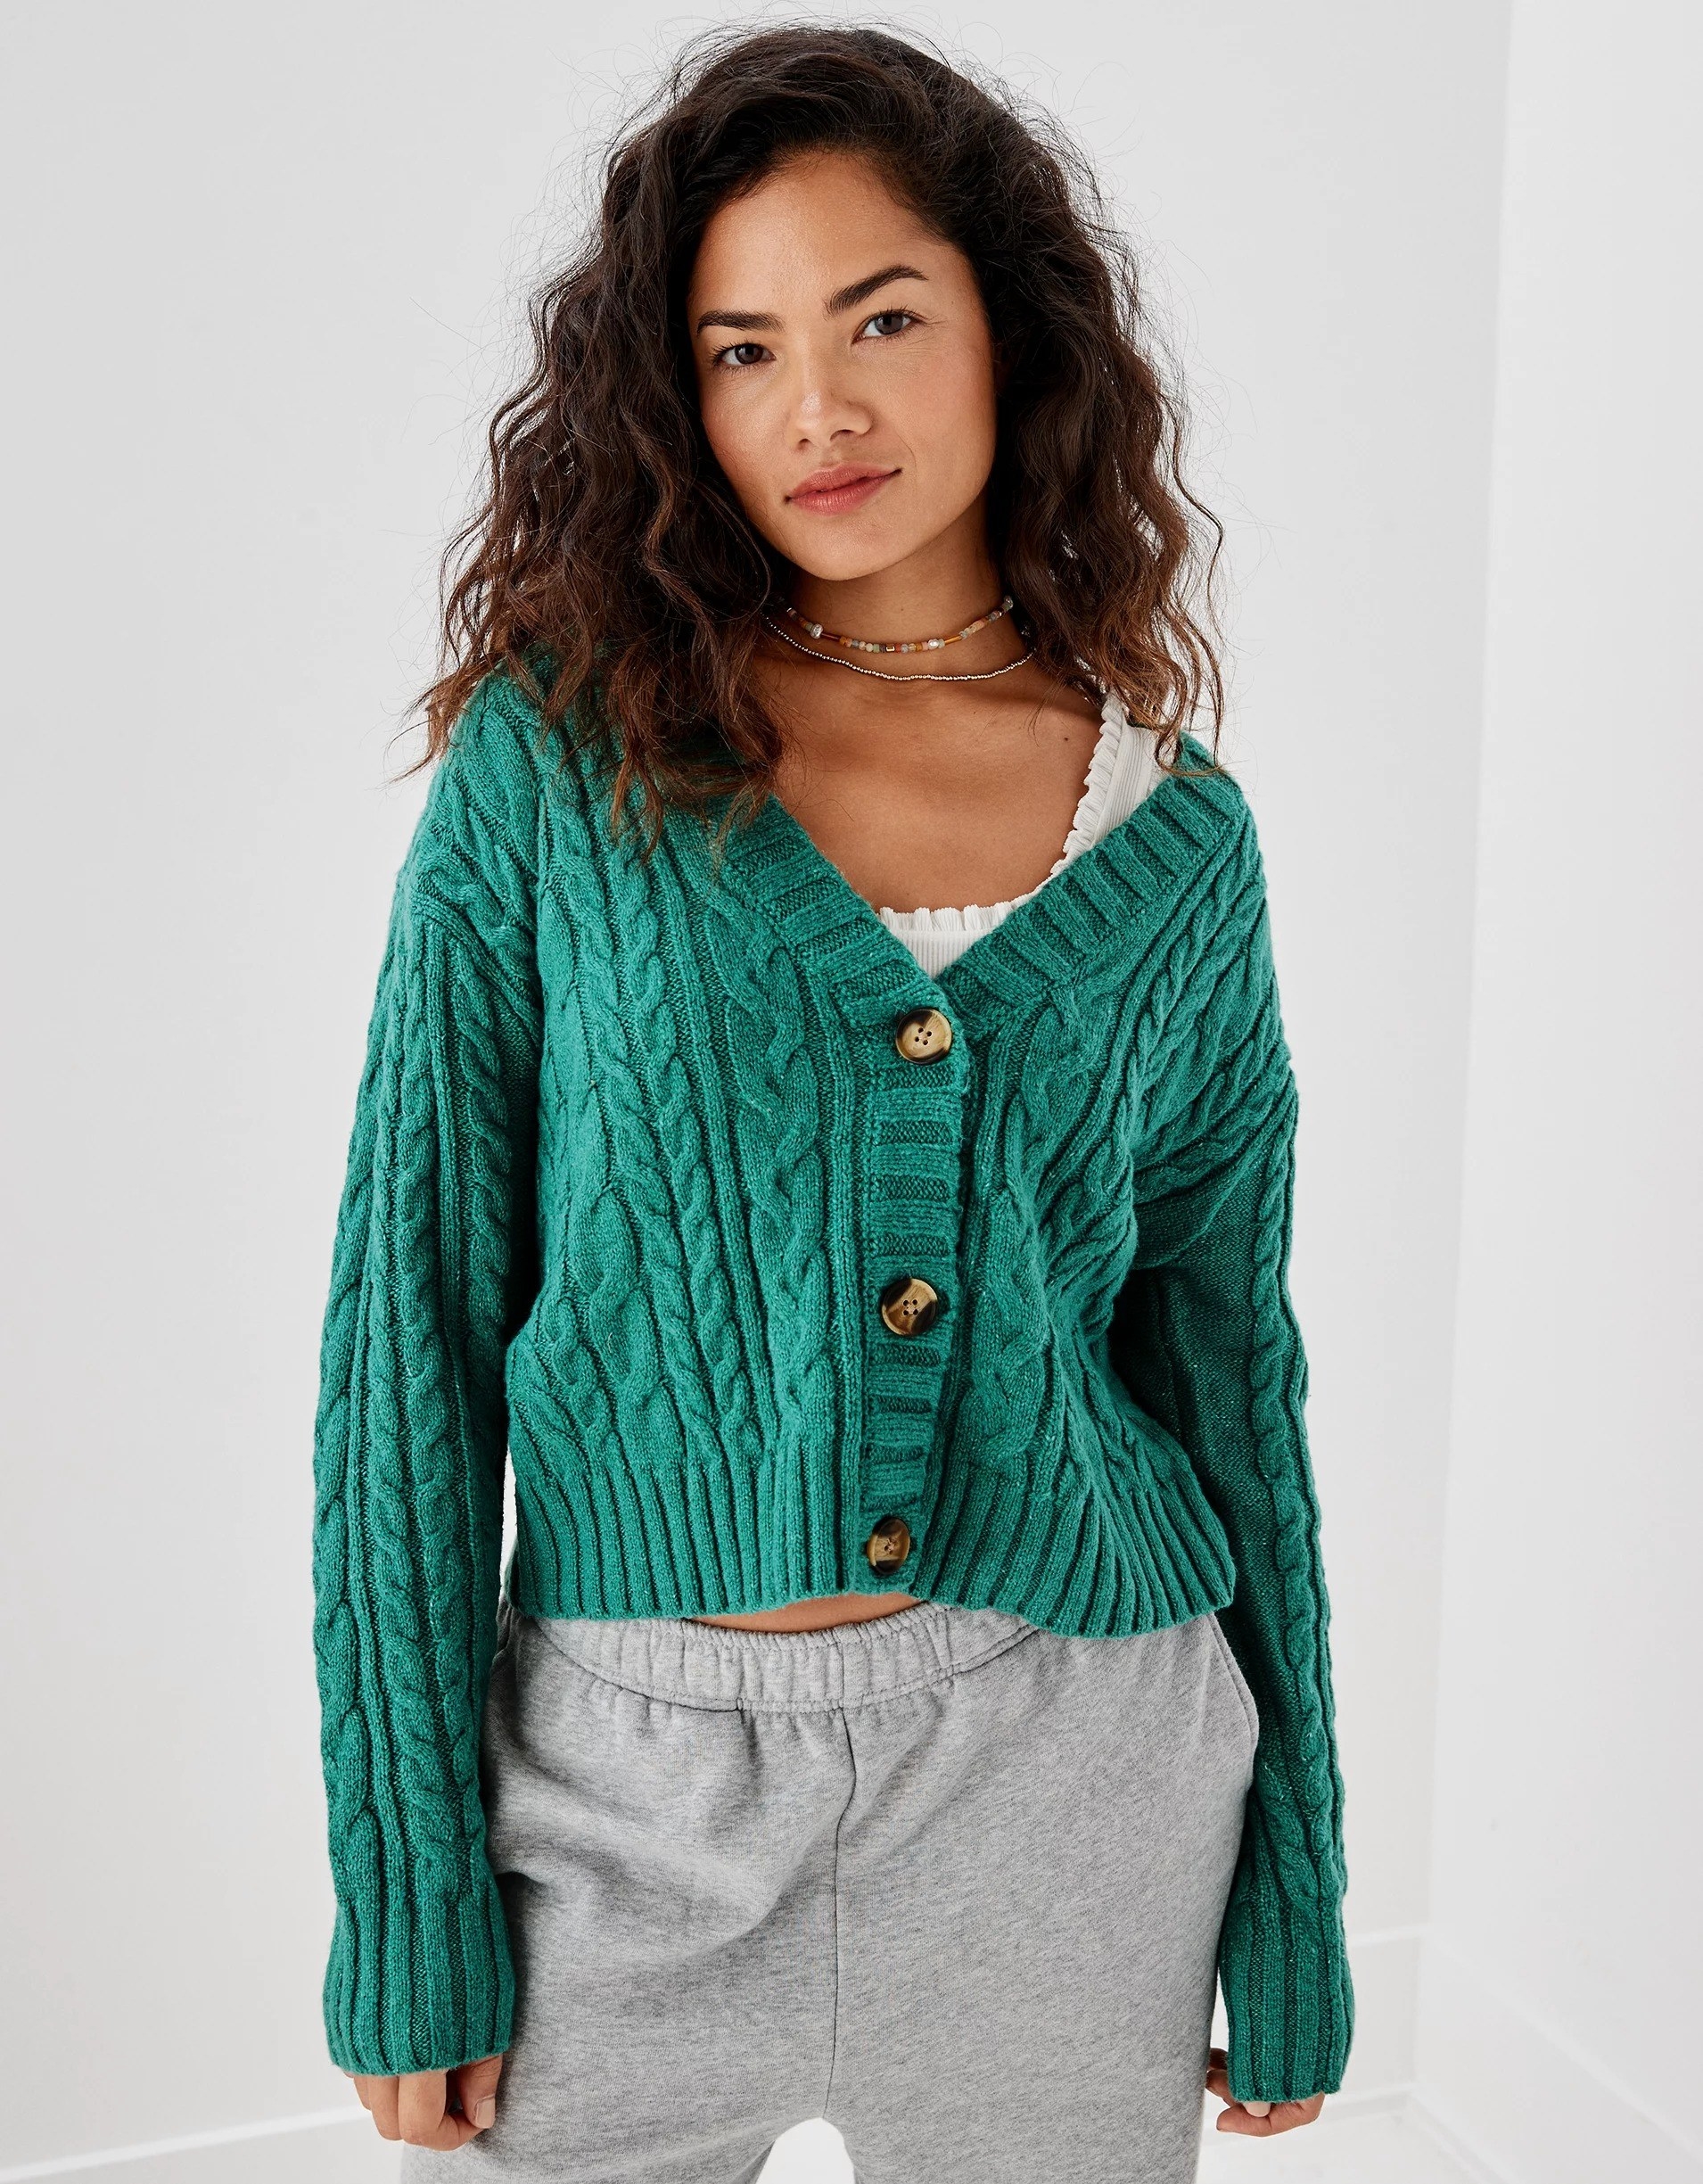 model wearing the cropped green cable knit cardigan with sweatpants